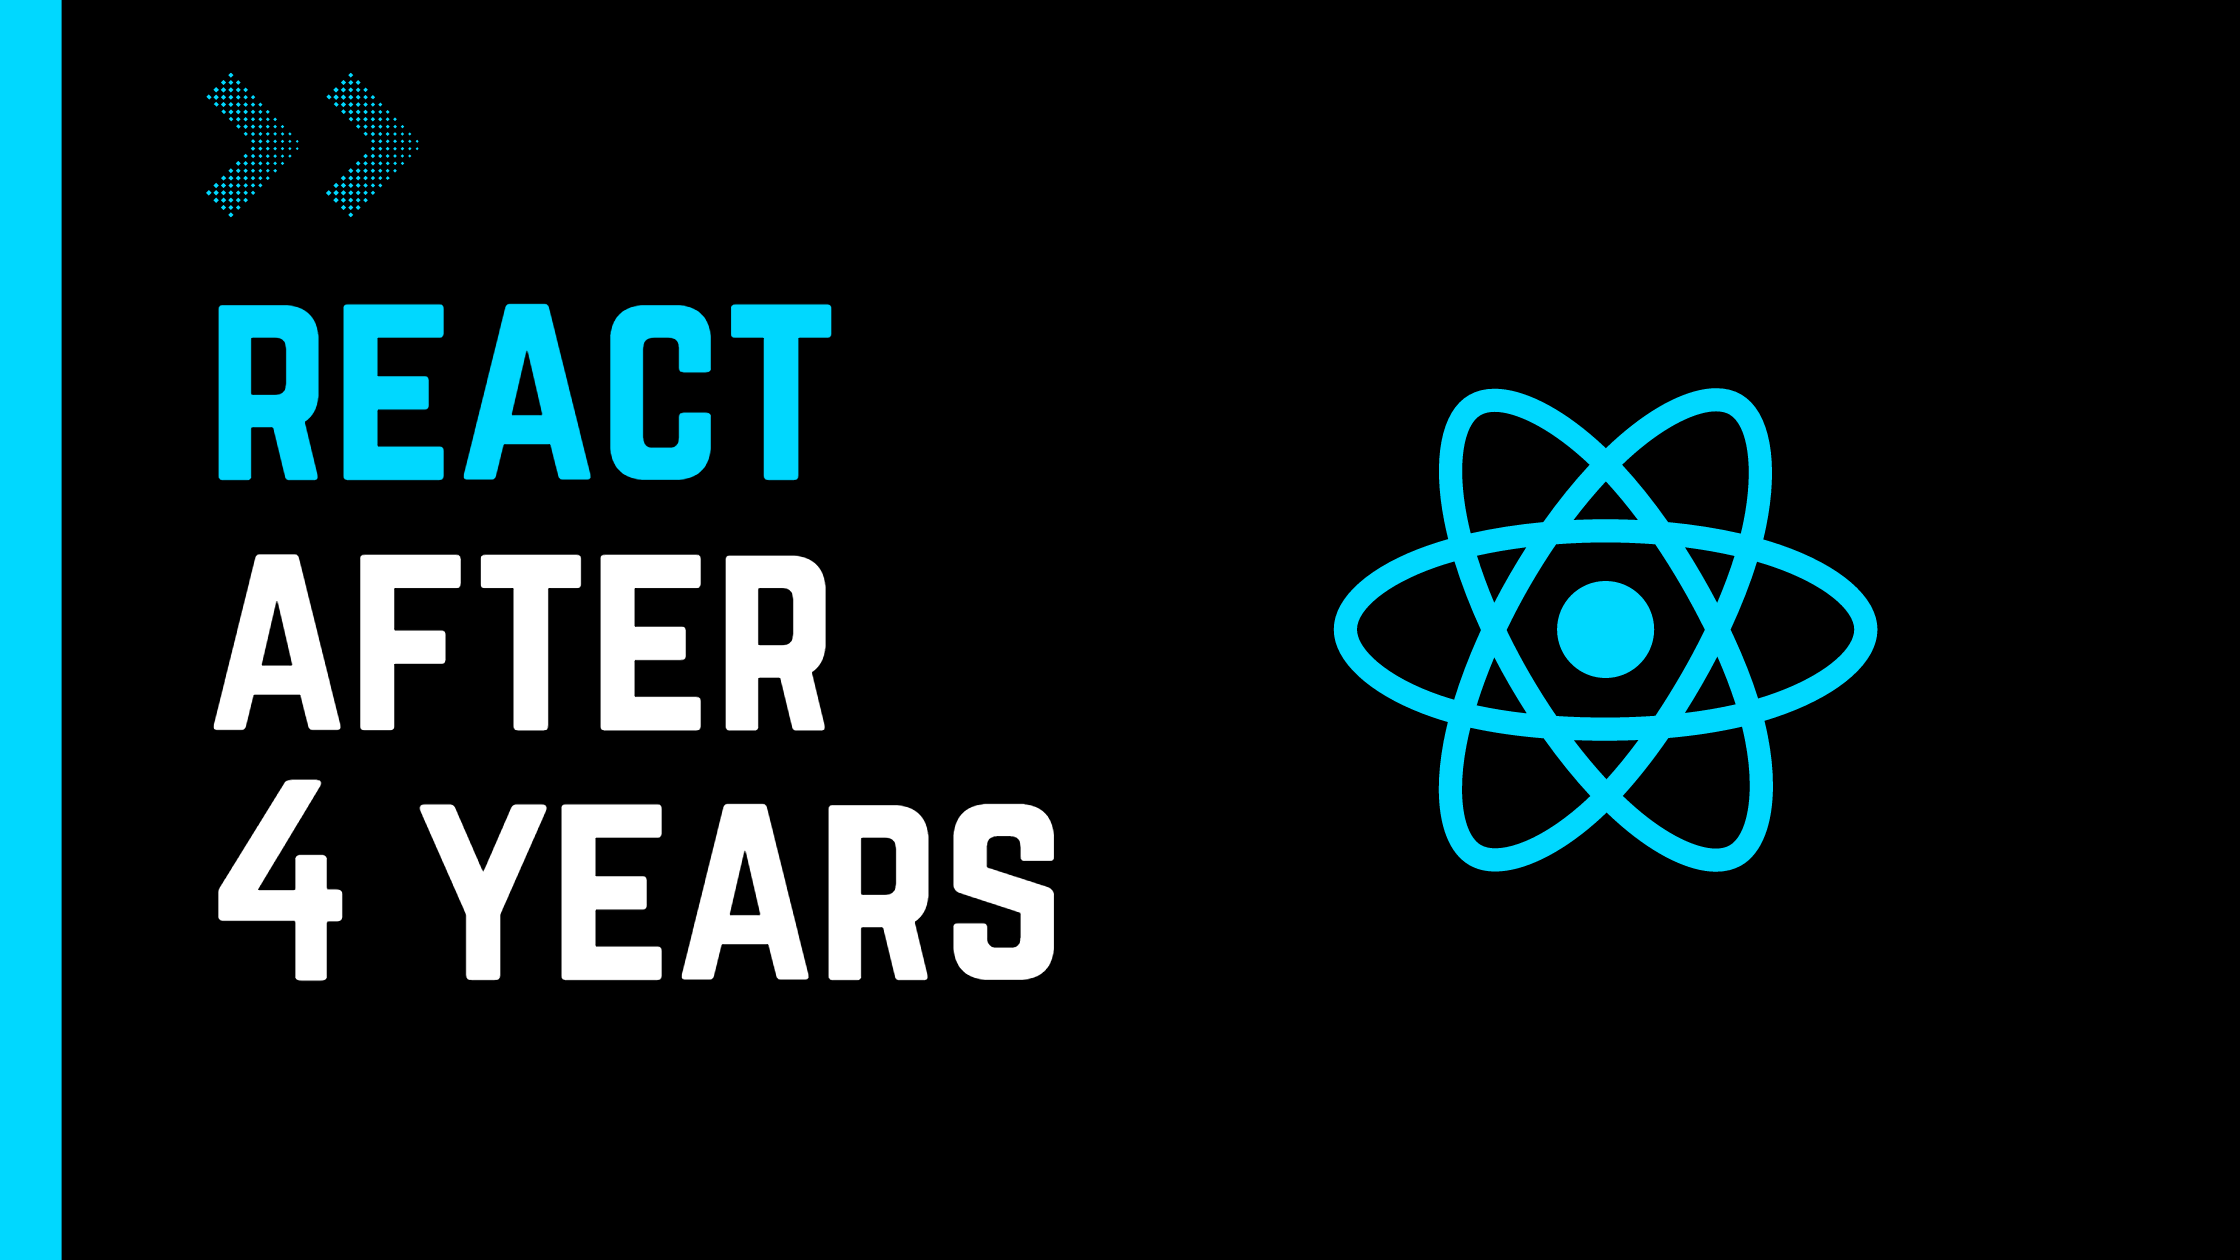 How do I feel about React after 4 years?